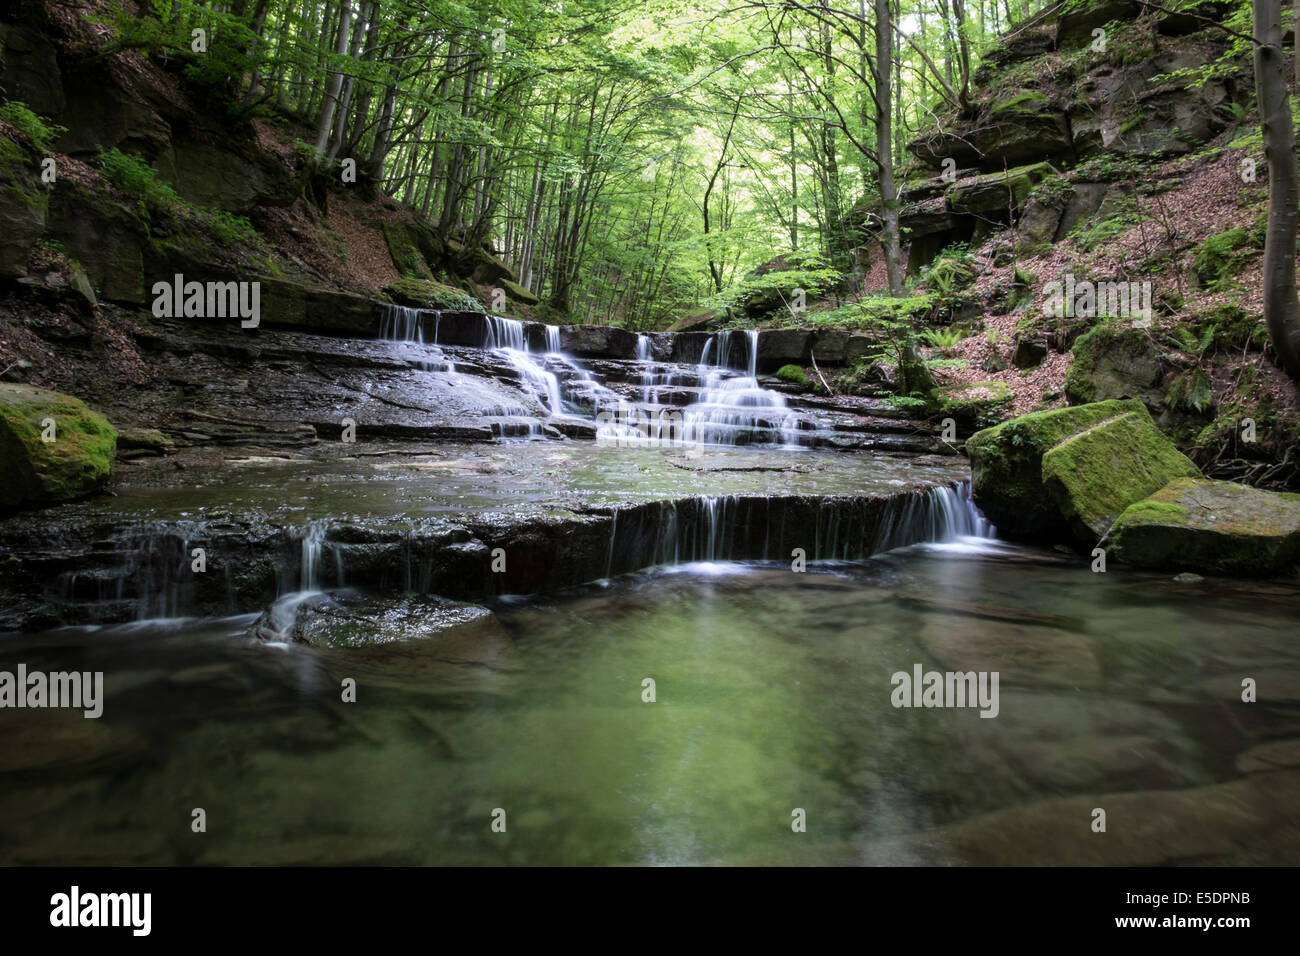 Water stream in a forest in Tuscany, Italy Stock Photo